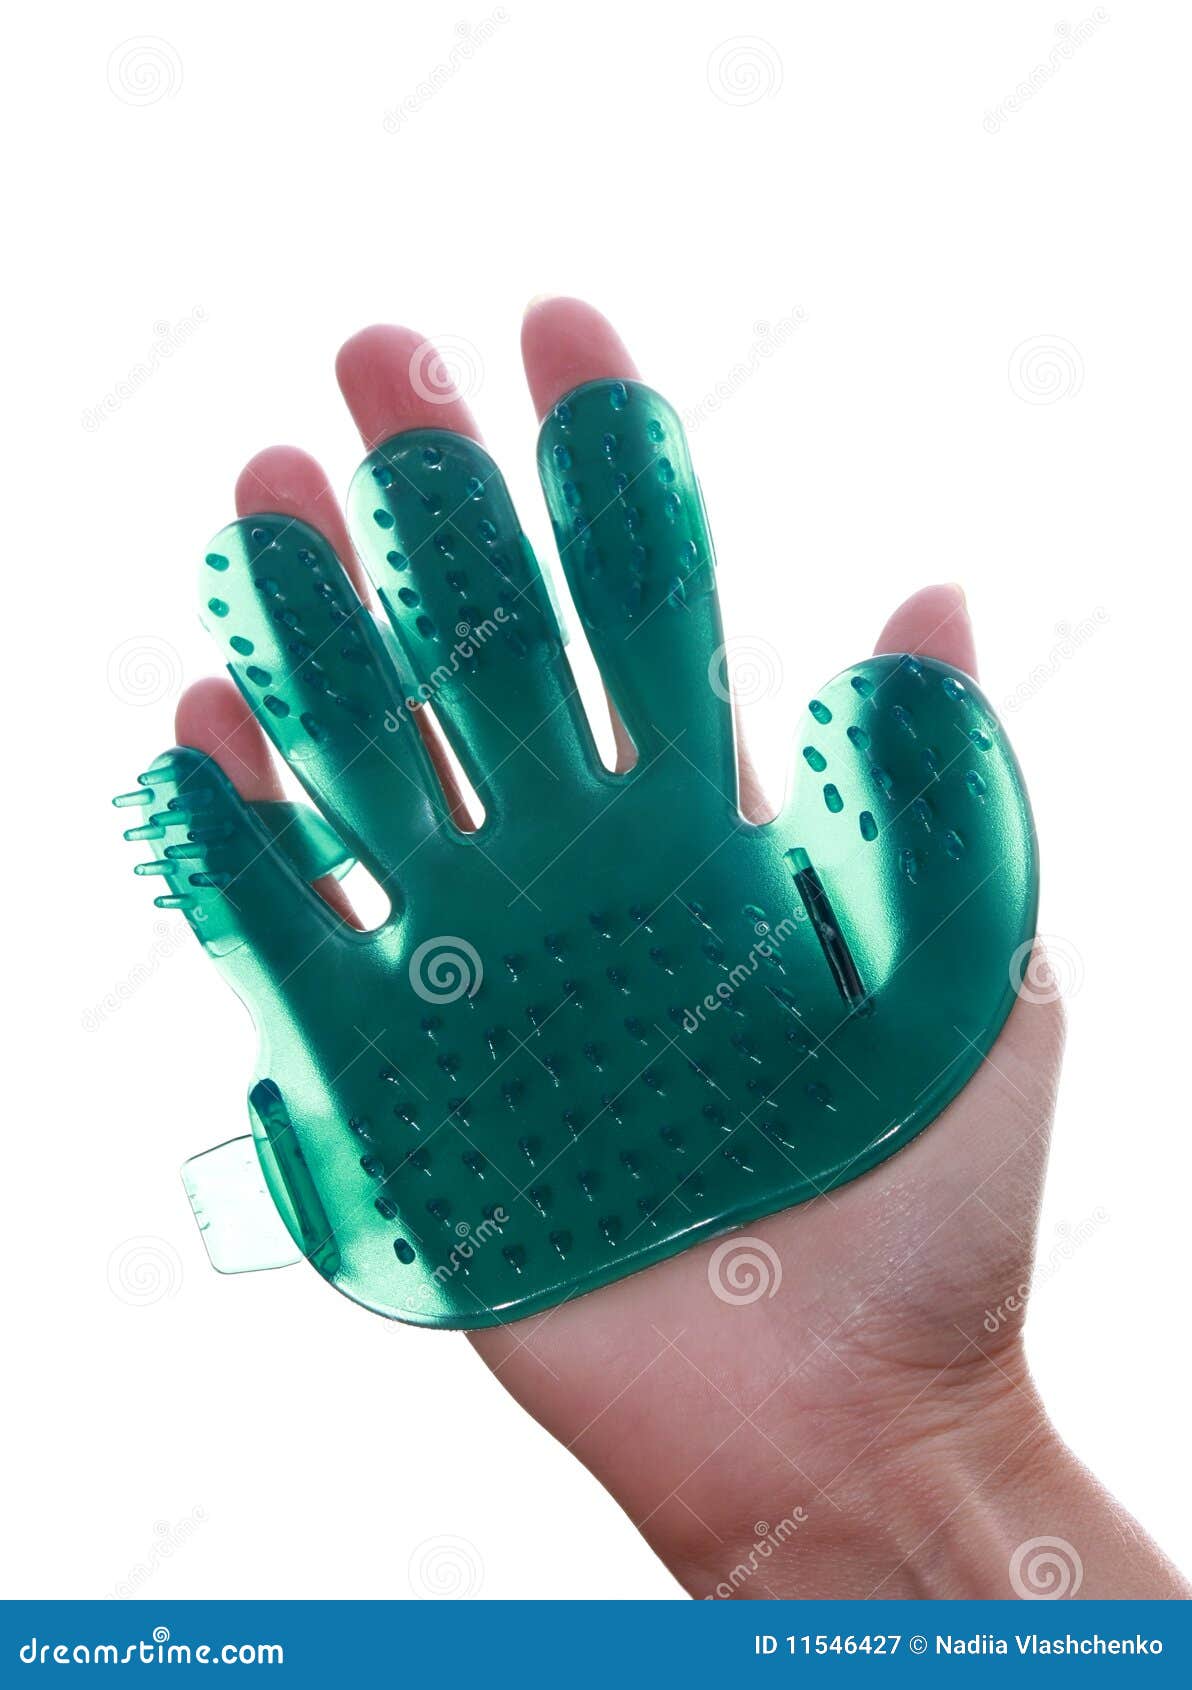 Massage accessories stock image. Image of accessories - 11546427